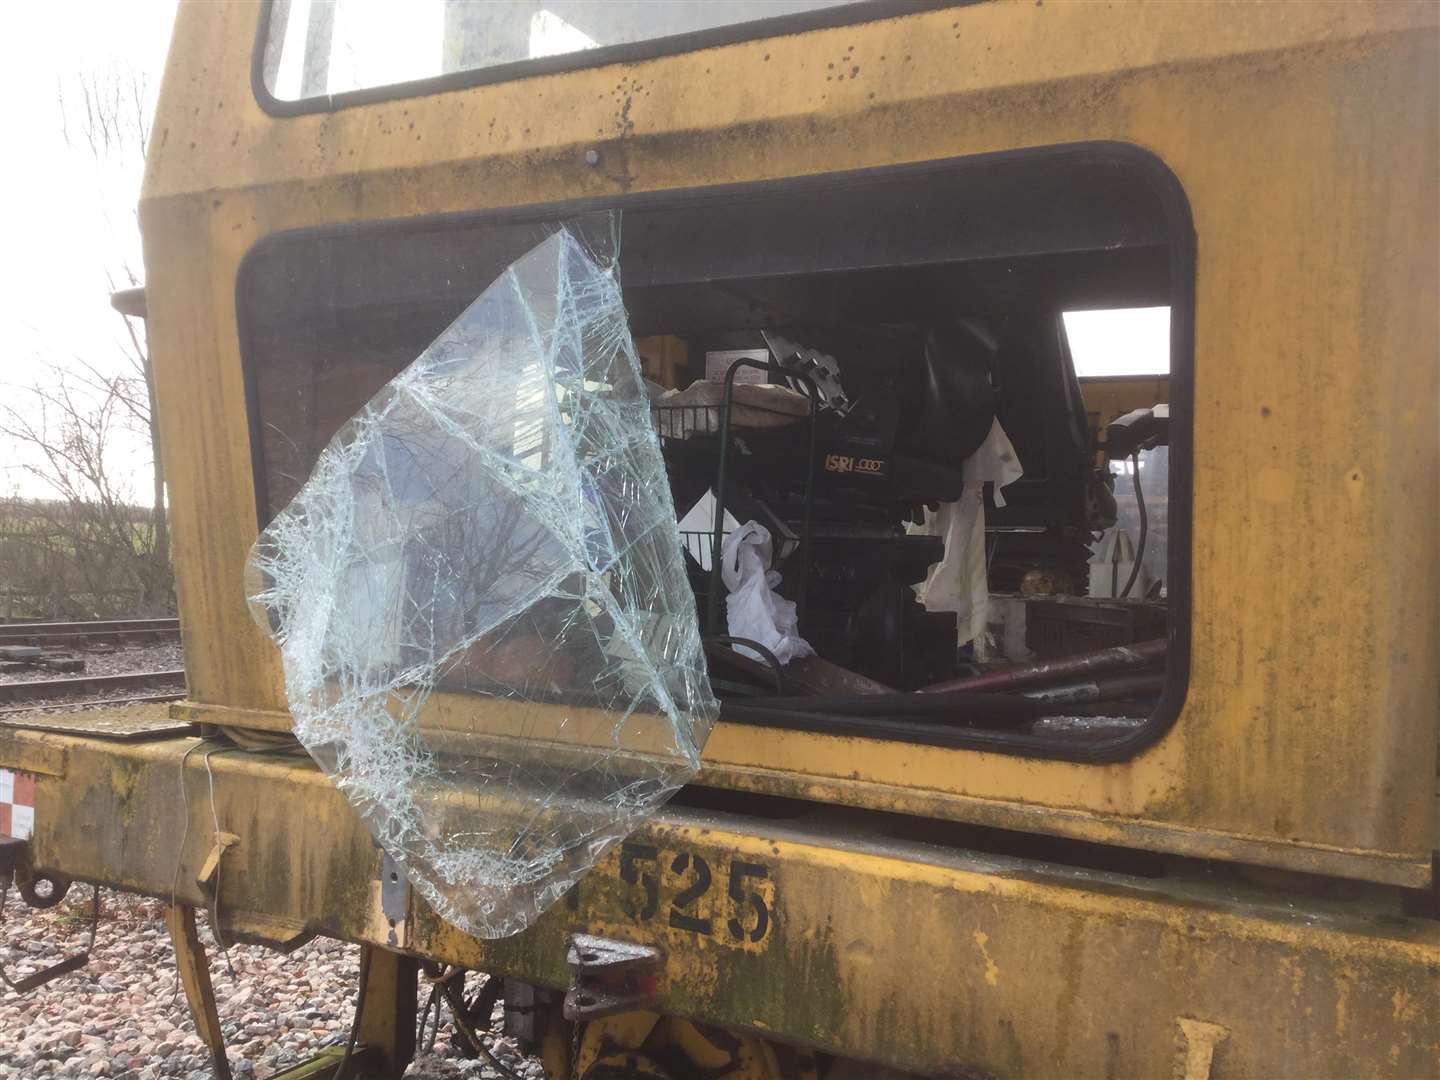 Damage to the tamping machine where glass covered by plastic was smashed to gain entry to the cab above